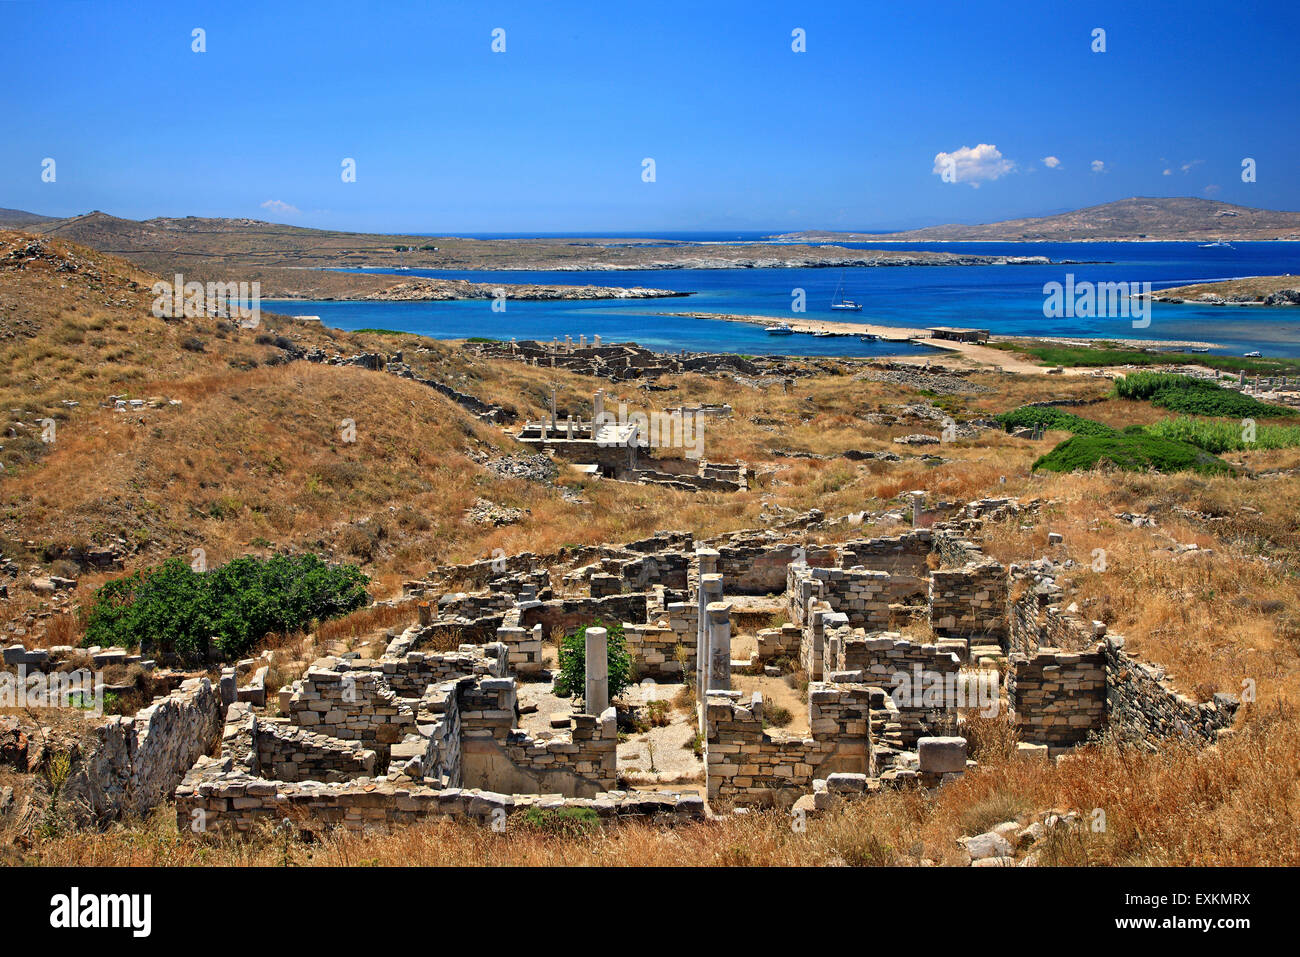 At the archaeological site of the 'sacred' island of Delos. In the background, Rineia island. Cyclades, Greece. Stock Photo